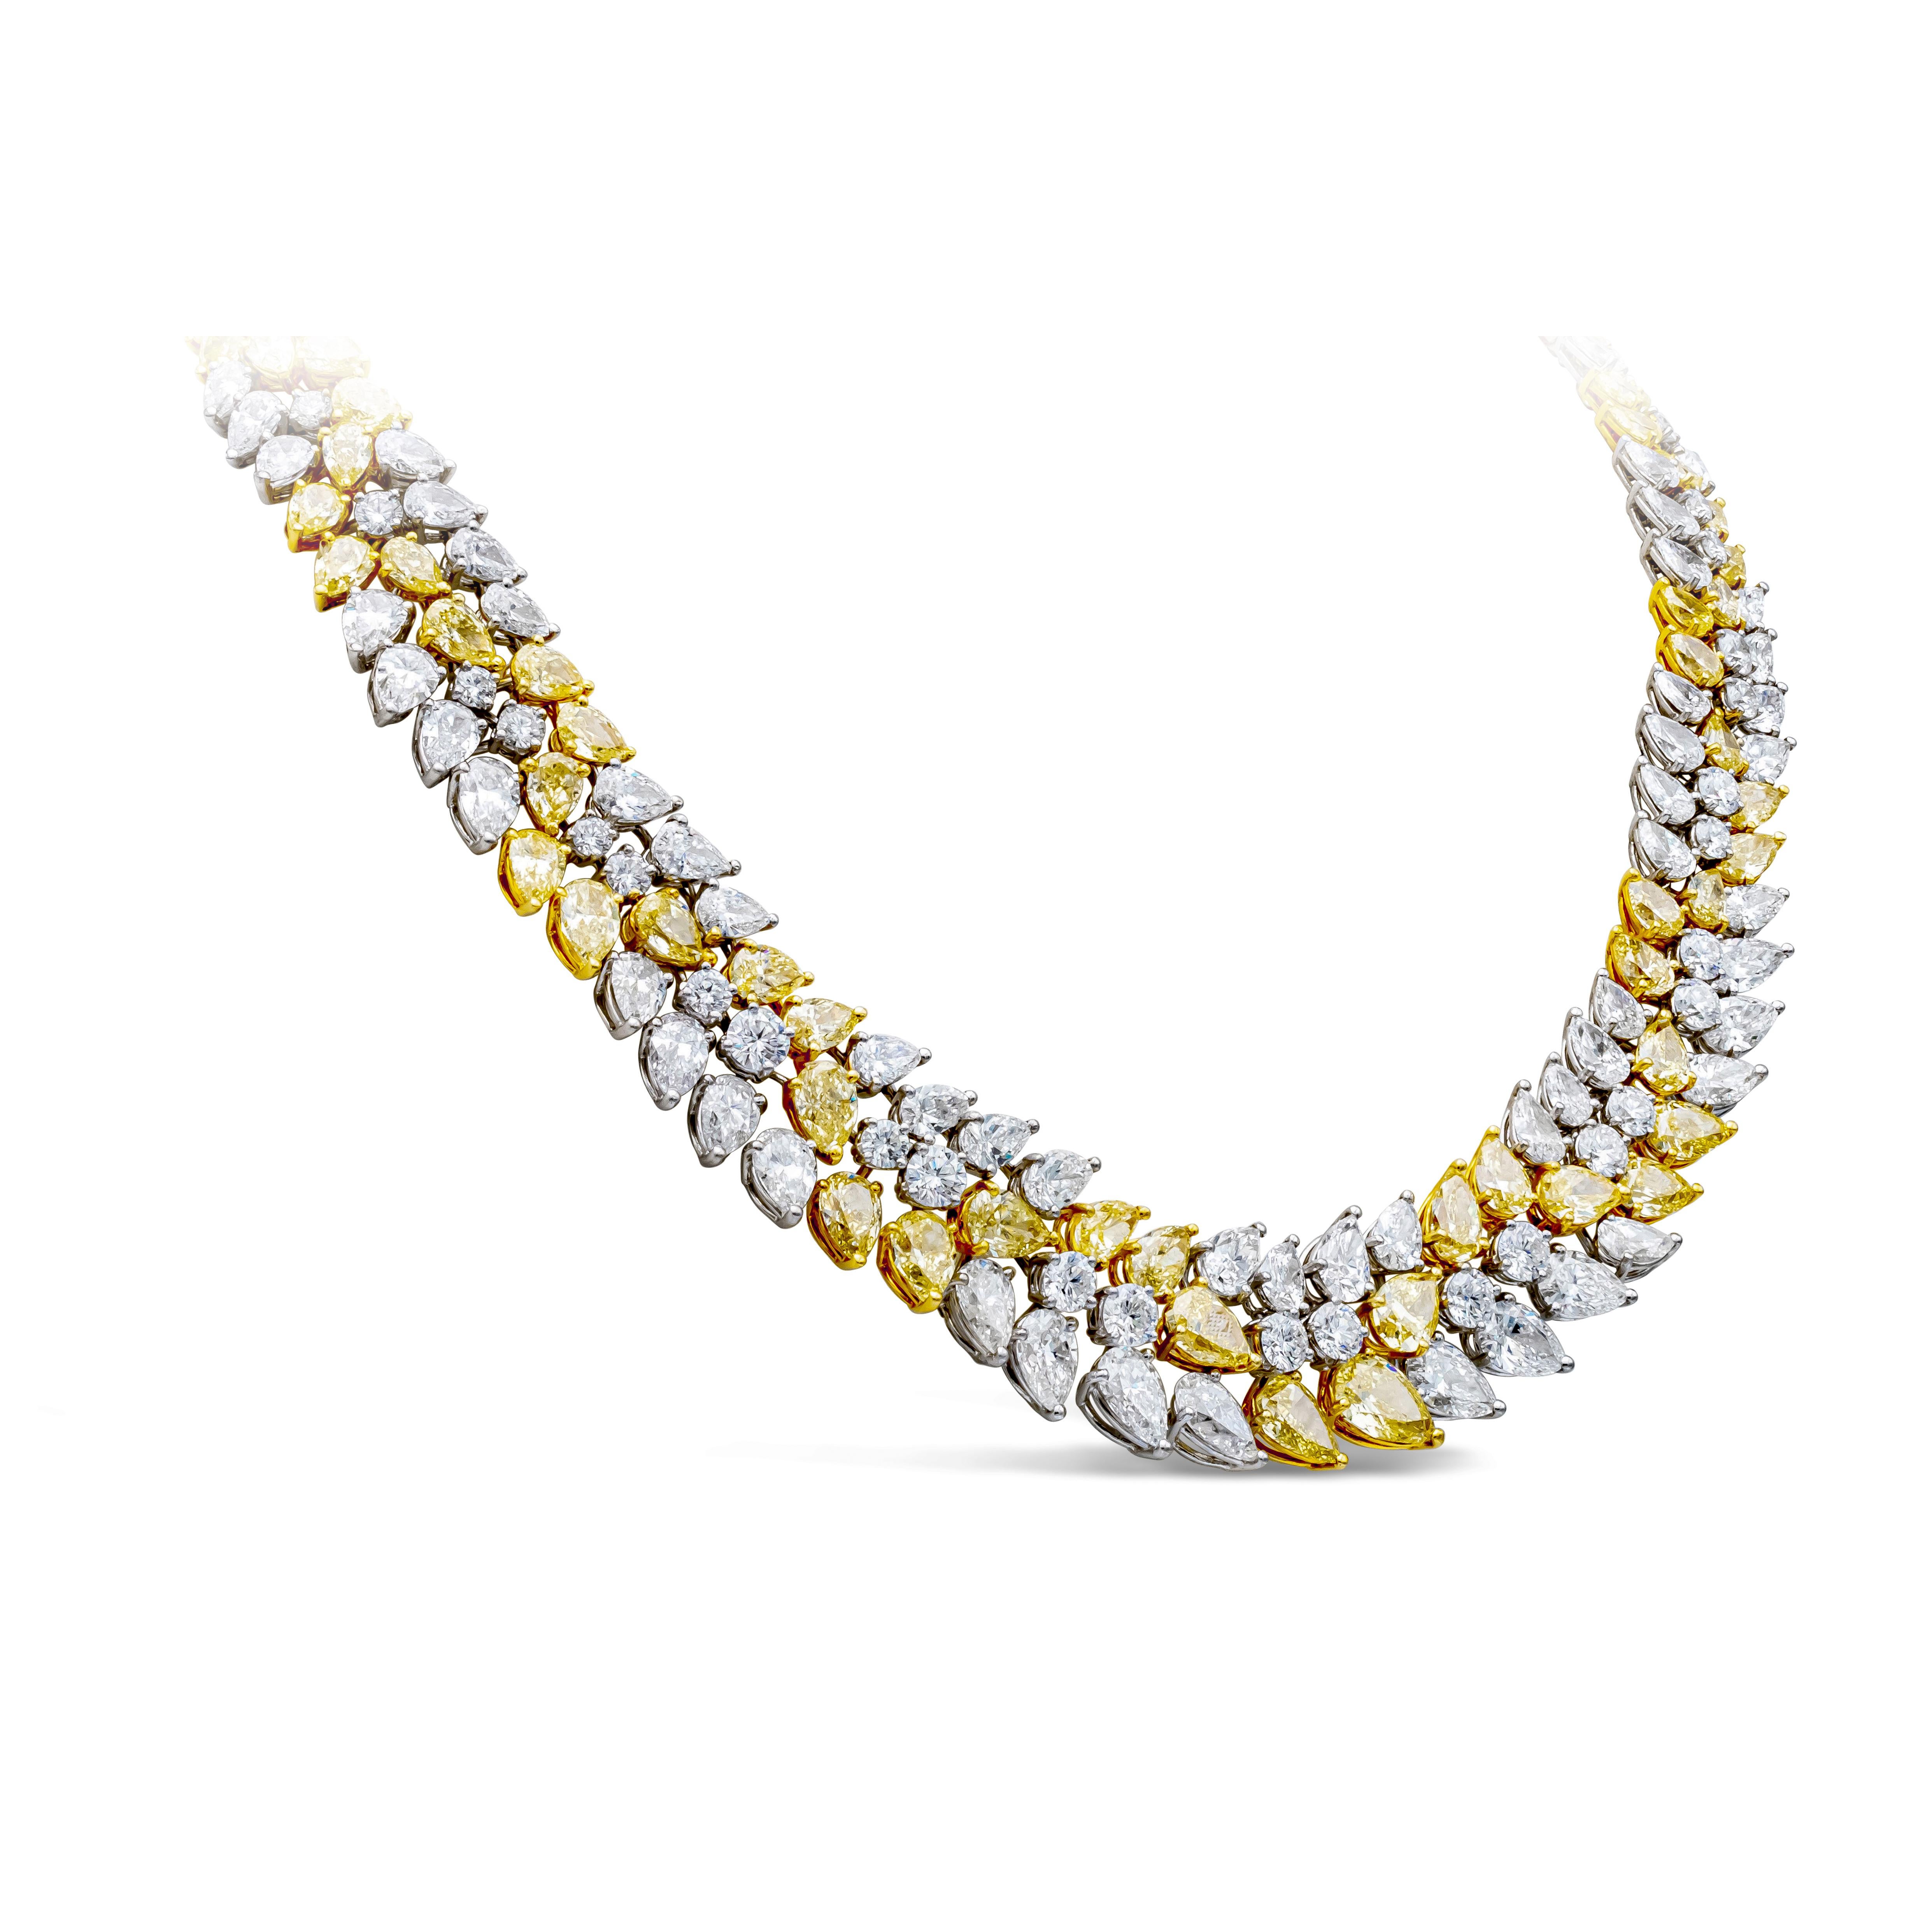 Well crafted high end necklace showcasing fancy intense yellow and white diamonds in mixed cuts. Fancy intense yellow pear shape diamonds weighs a total of 37.62 carats, VS-SI clarity. Brilliant round and pear shape white diamonds weighs a total of